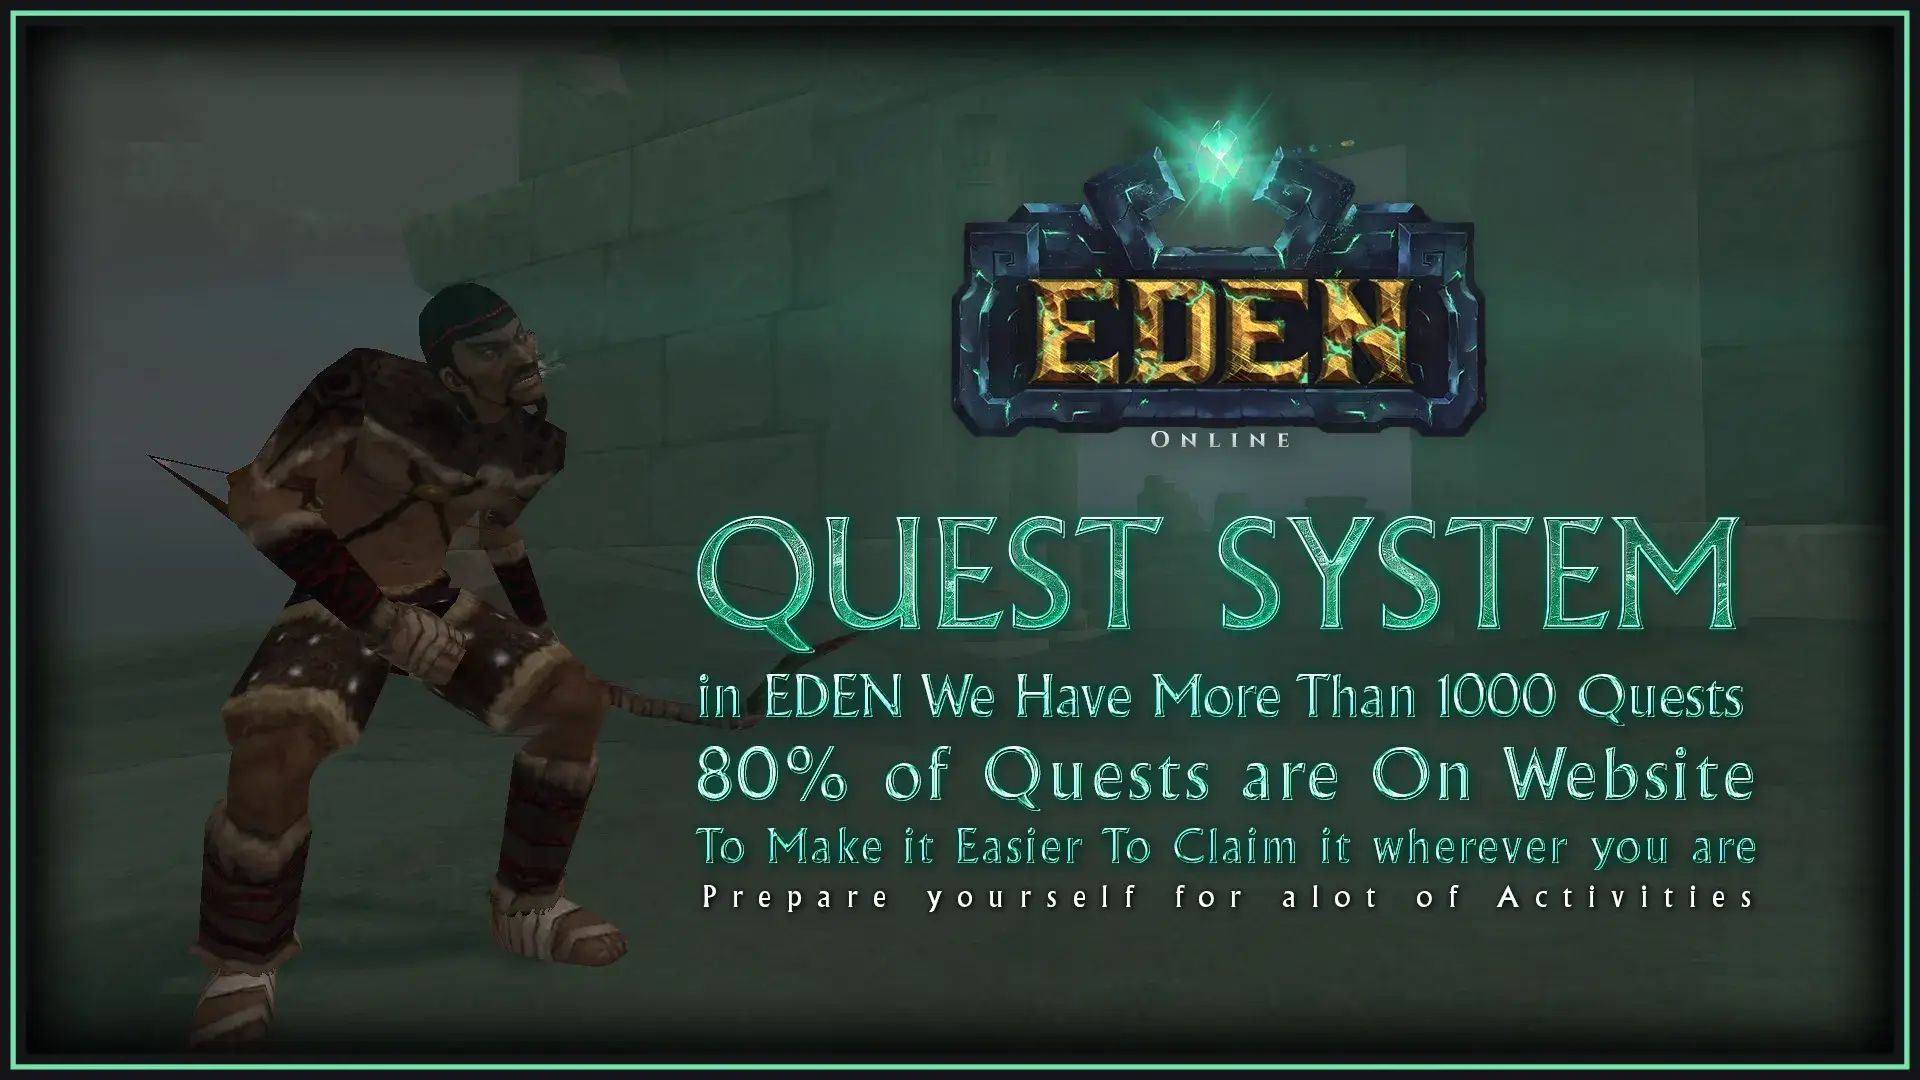 More than 1,000 Quest now ready for you to Have fun as much as you can.